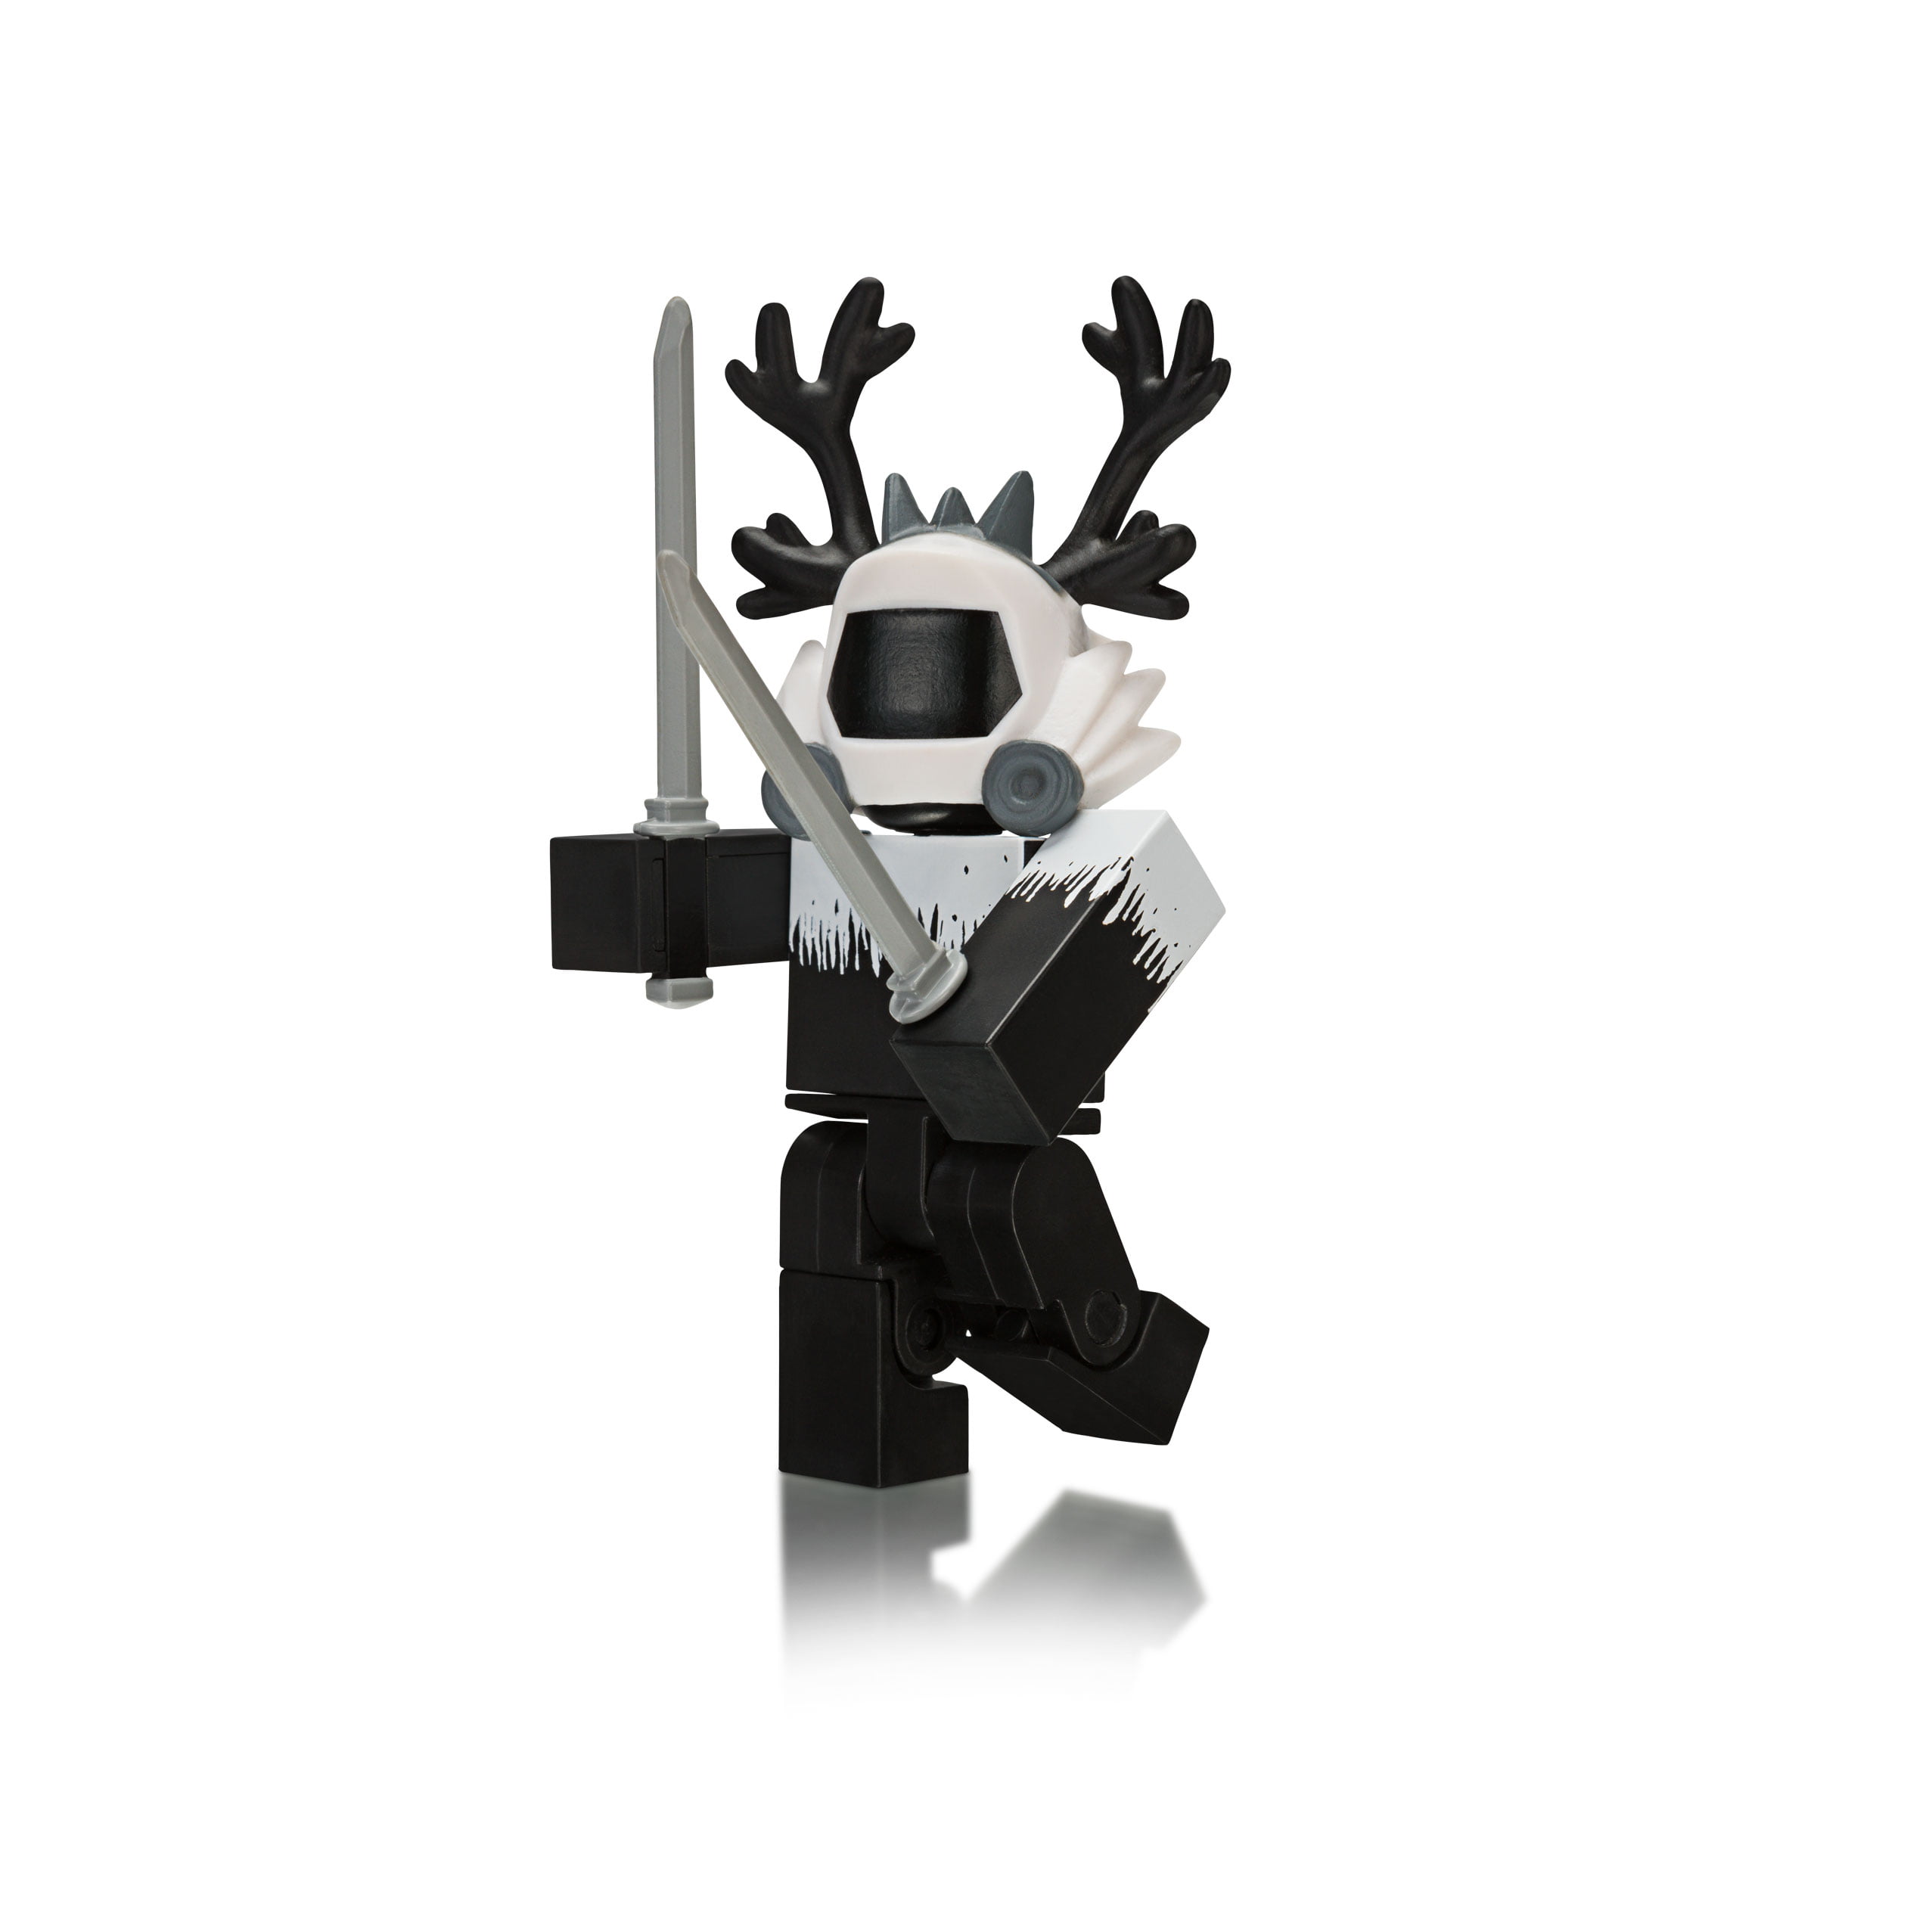 Roblox Action Collection Series 6 Mystery Figure Includes 1 Figure Exclusive Virtual Item Walmart Com Walmart Com - 4 6pcsset roblox series action figure toy game figuras